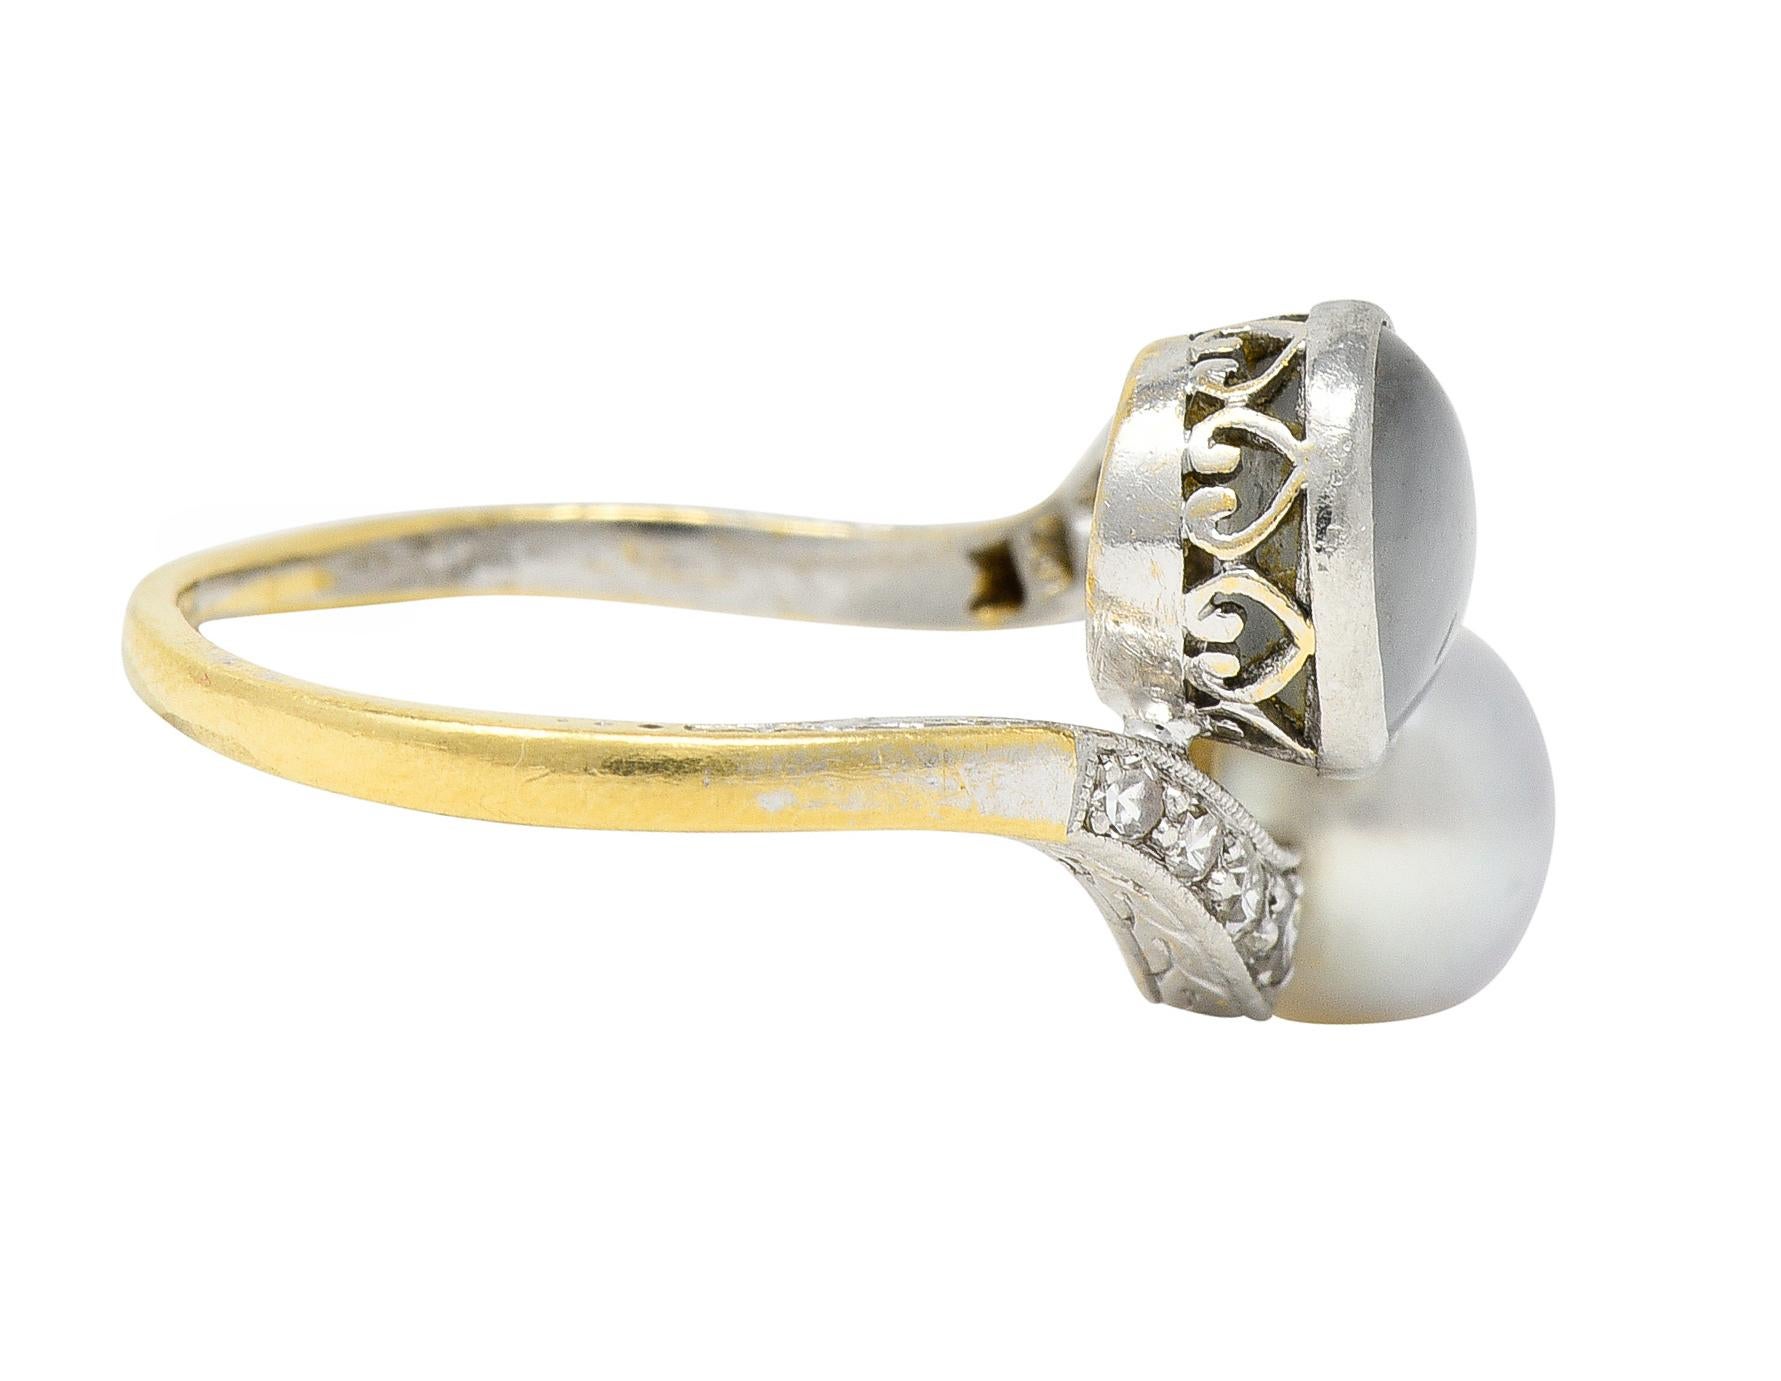 Cabochon Edwardian Pearl Star Sapphire Diamond Platinum-Topped 18 Karat Yellow Gold Ring For Sale